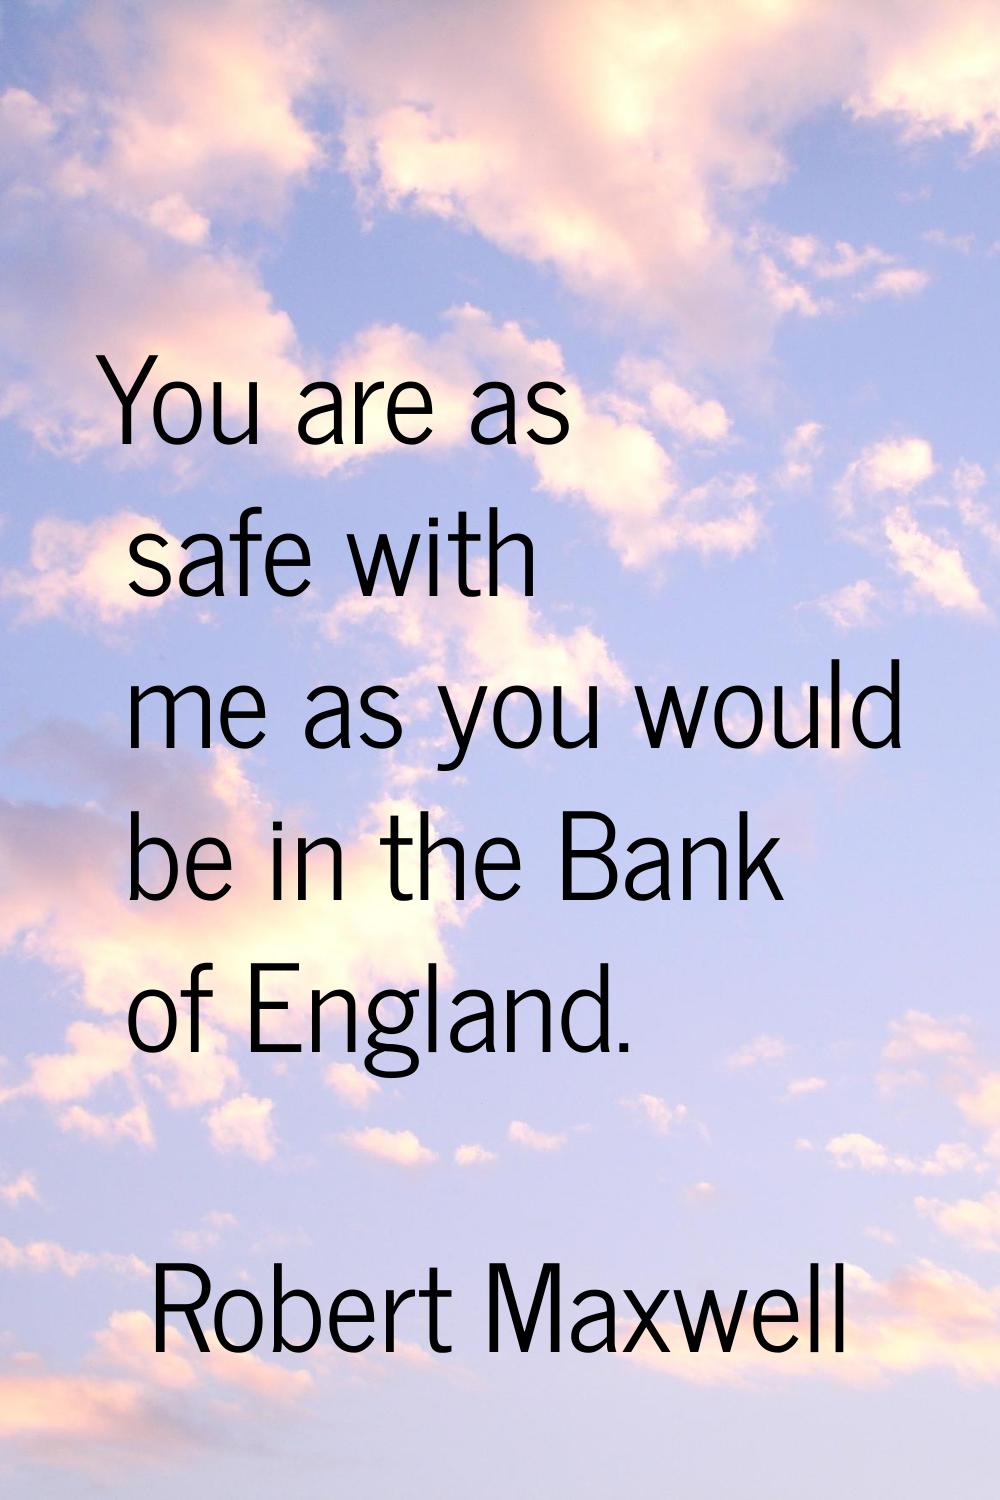 You are as safe with me as you would be in the Bank of England.